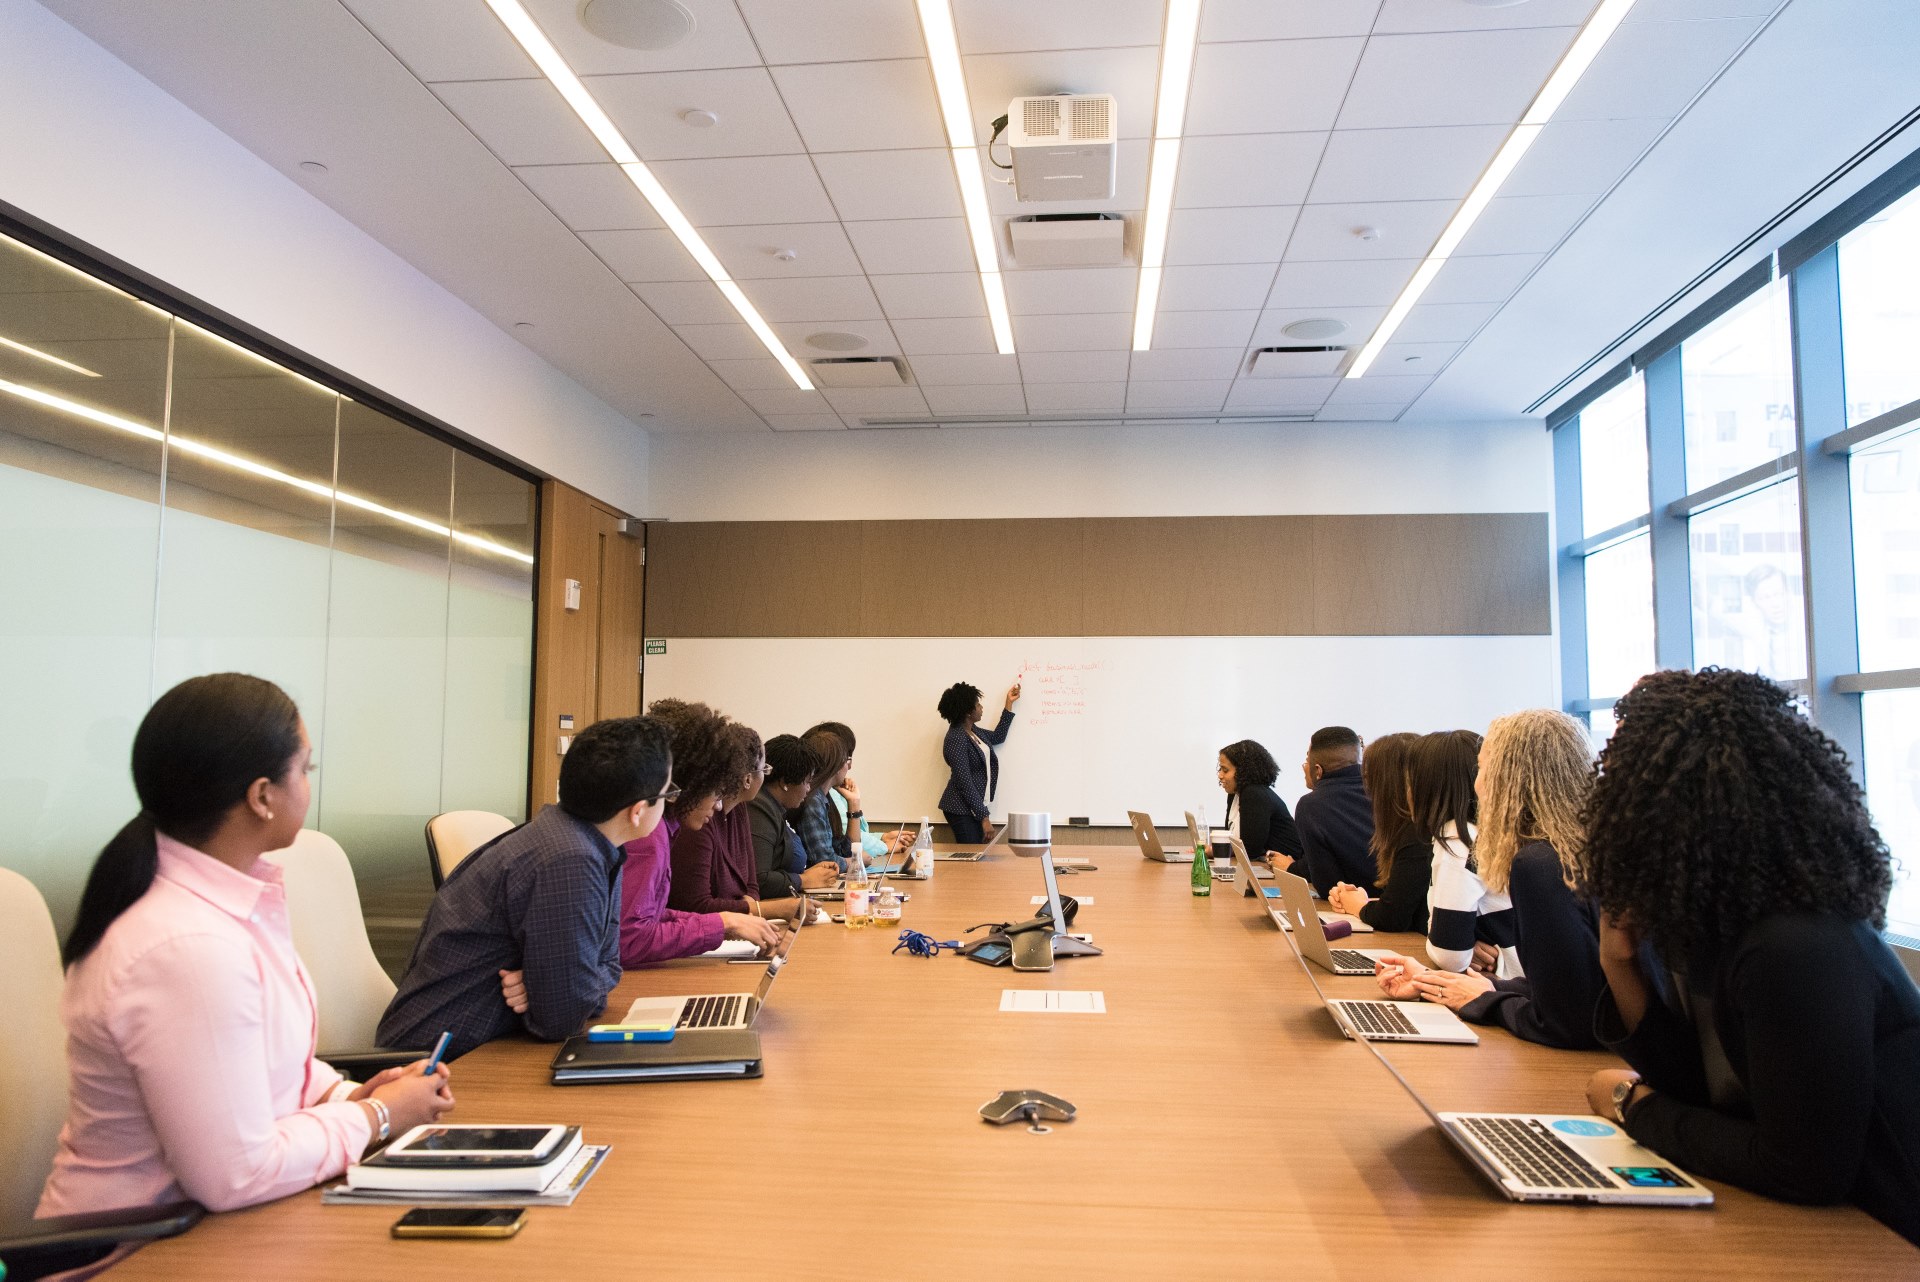 Photo of a group of people in a meeting room with one person at the whiteboard writing something